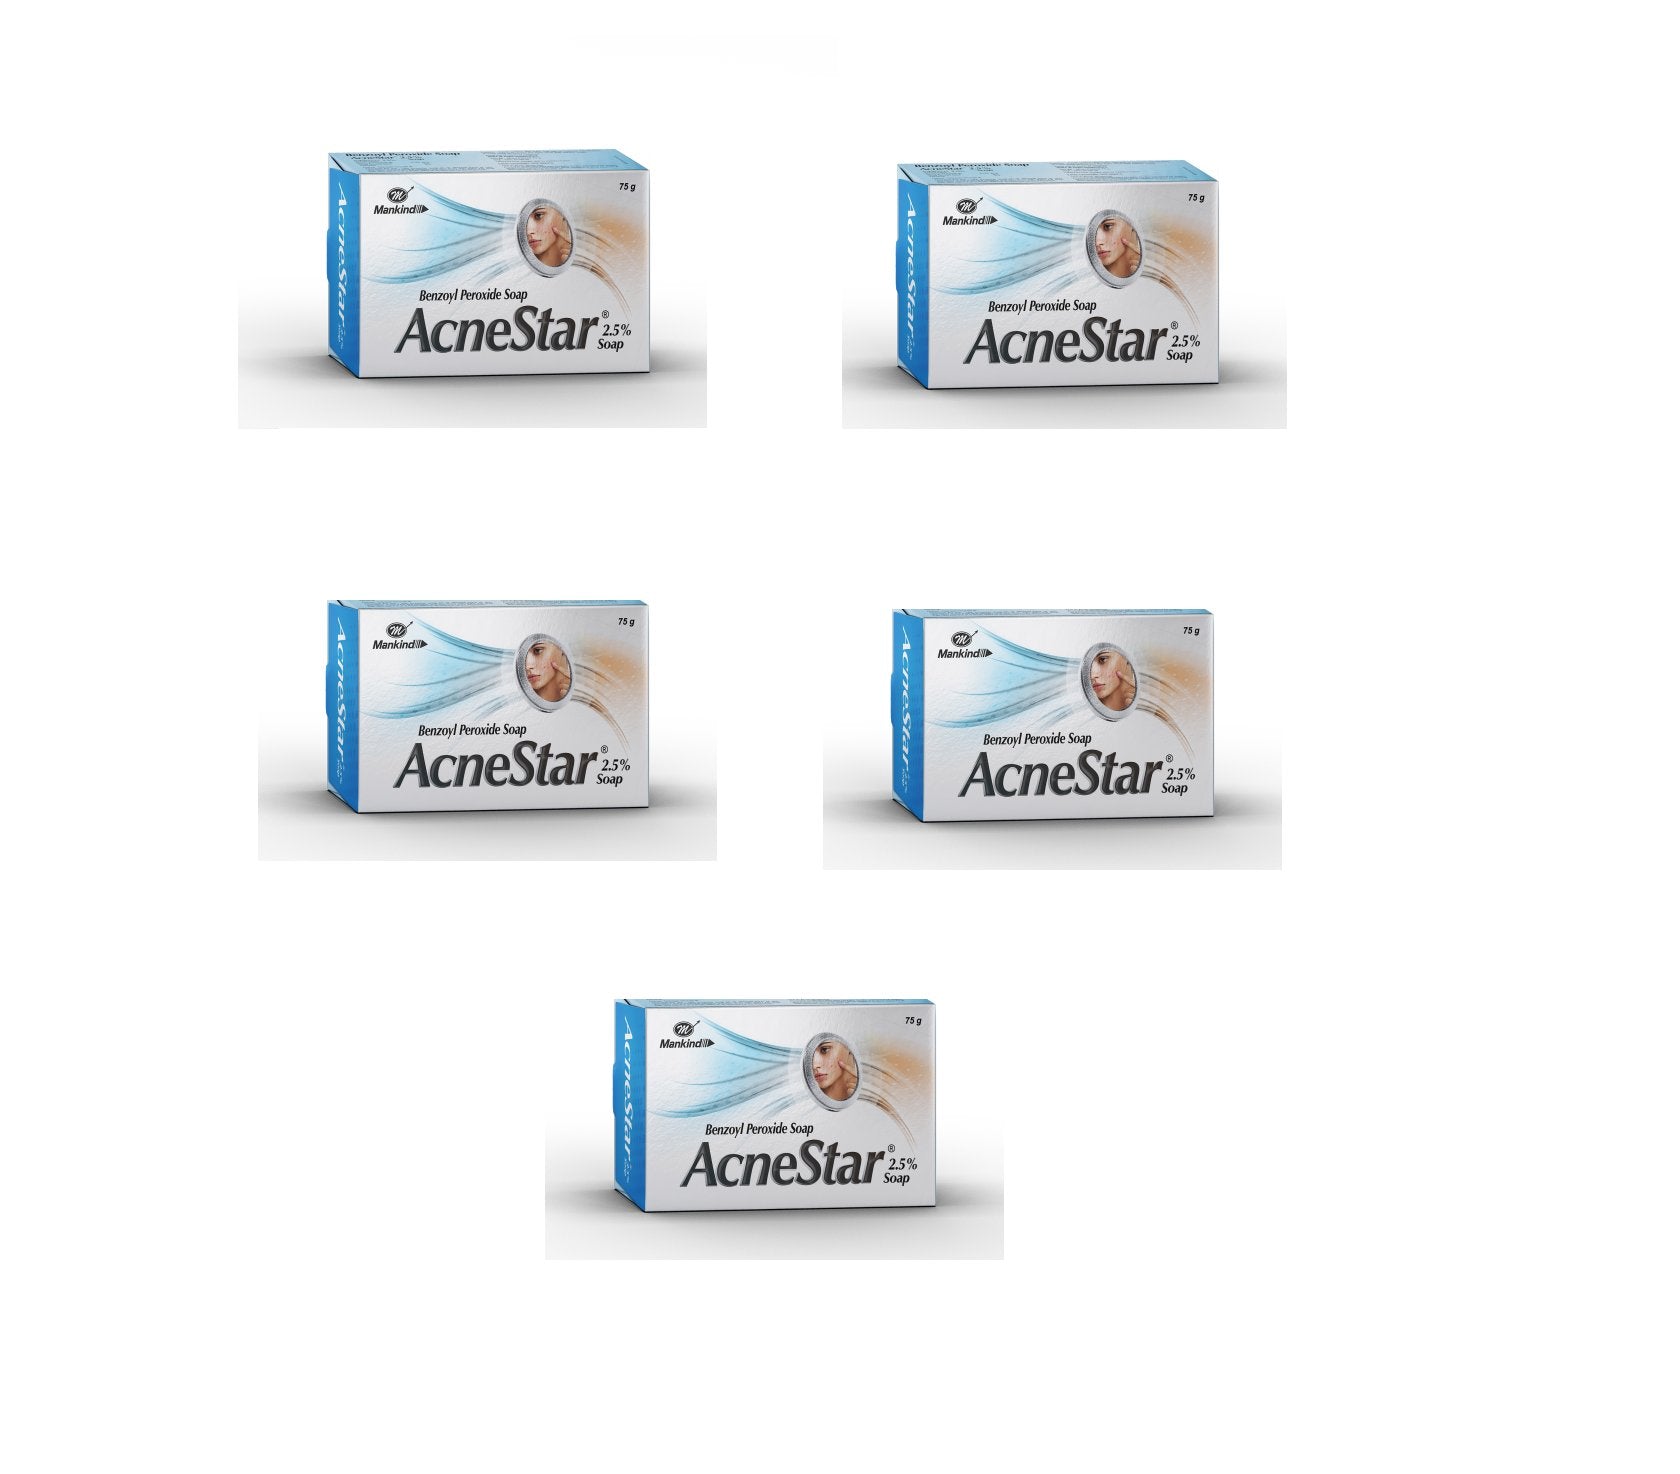 Acnestar 2.5% Soap, (75gm) (pack of 5)